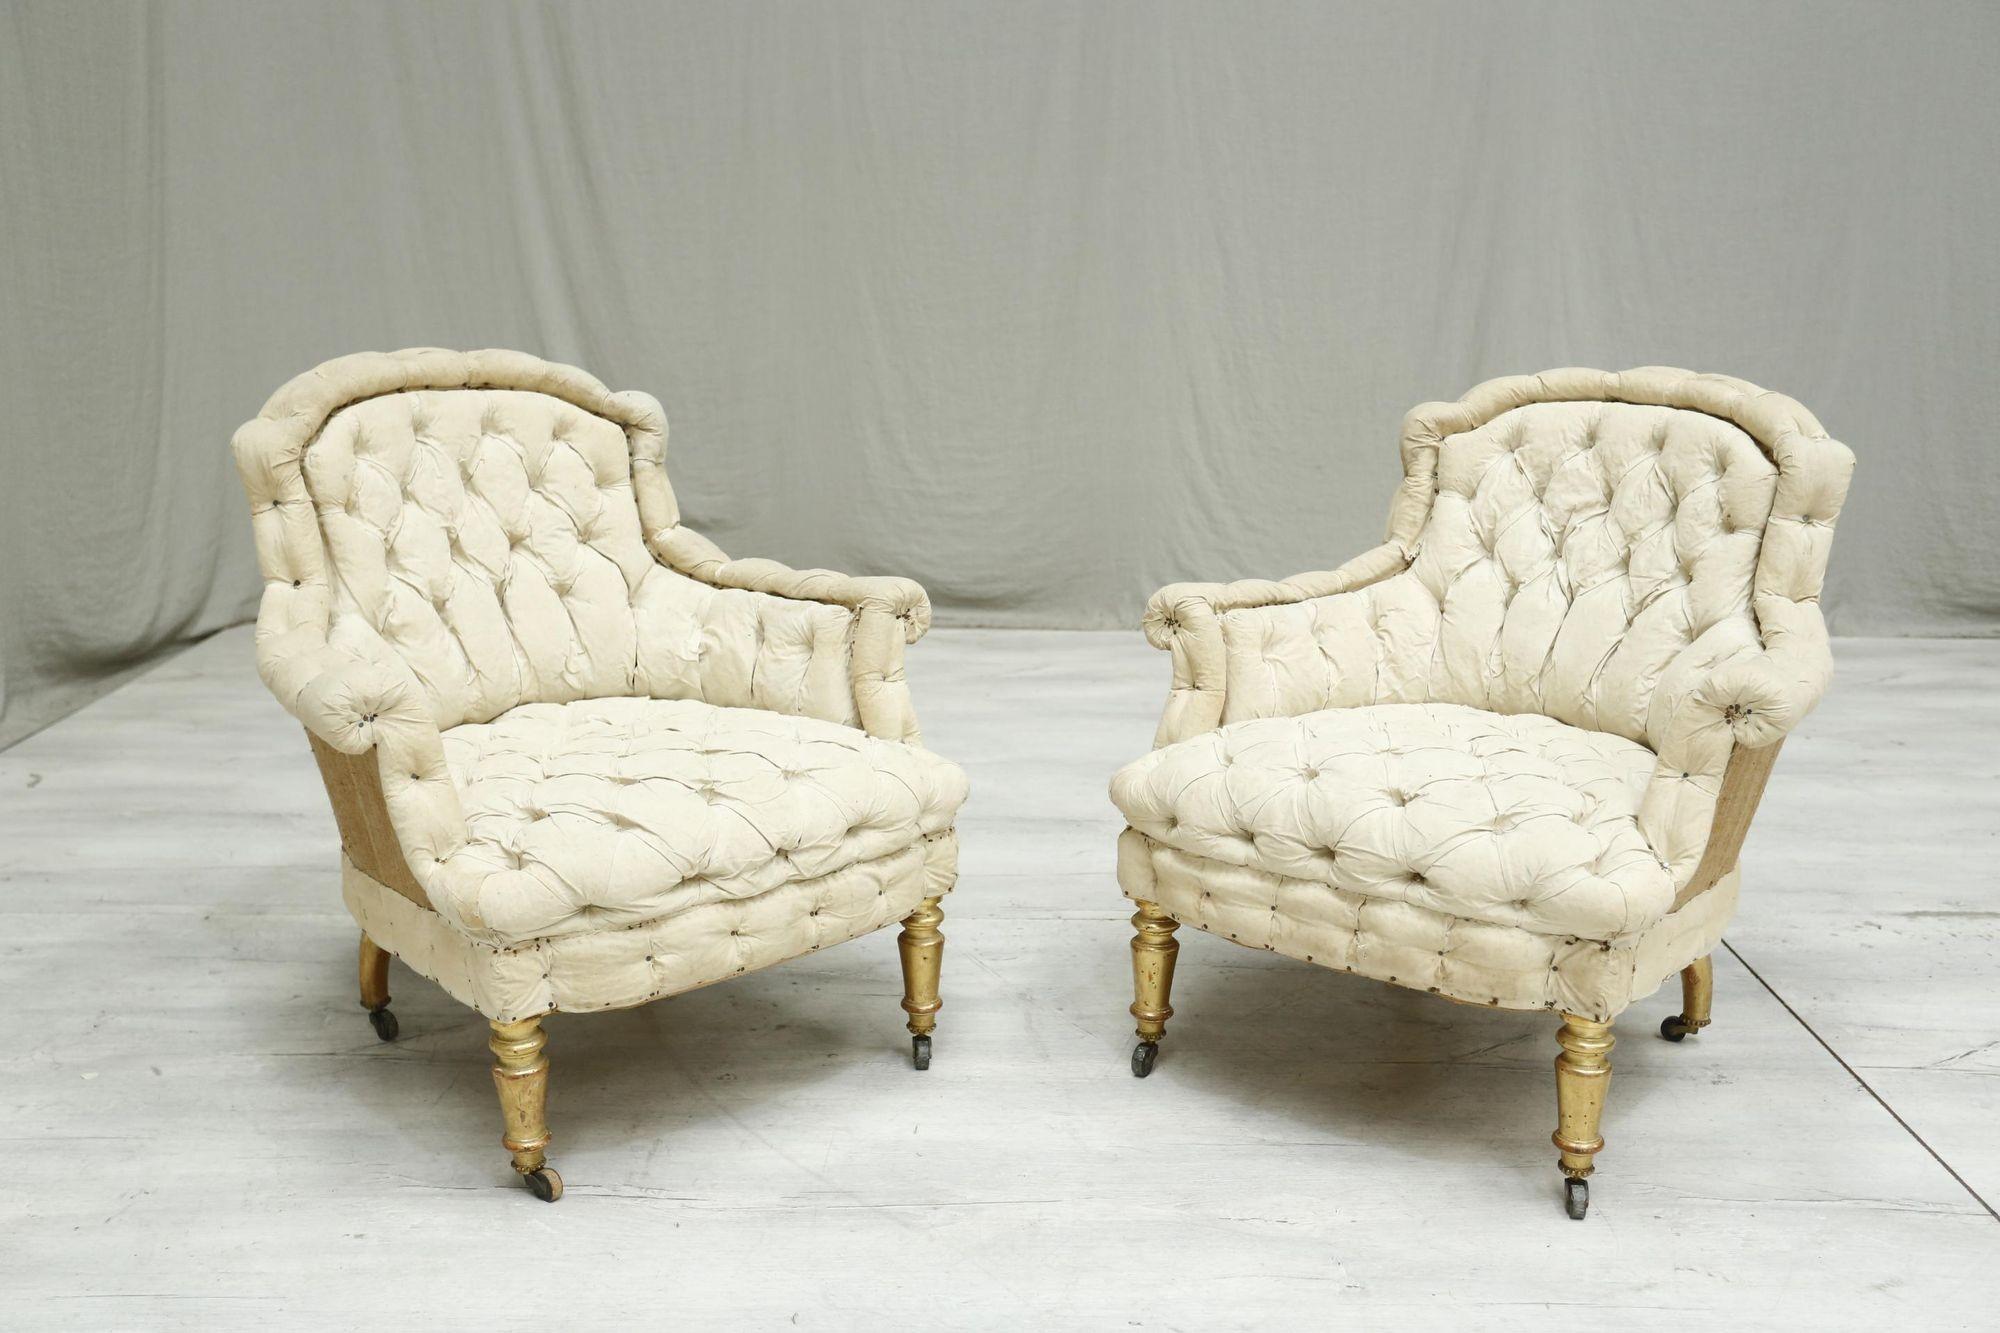 These are a superb quality pair of 19th century French armchairs. The deep buttoned details with the piecrust edge is a great combination and when these are upholstered they will be a very inviting pair of chairs. Combine that with the original gilt